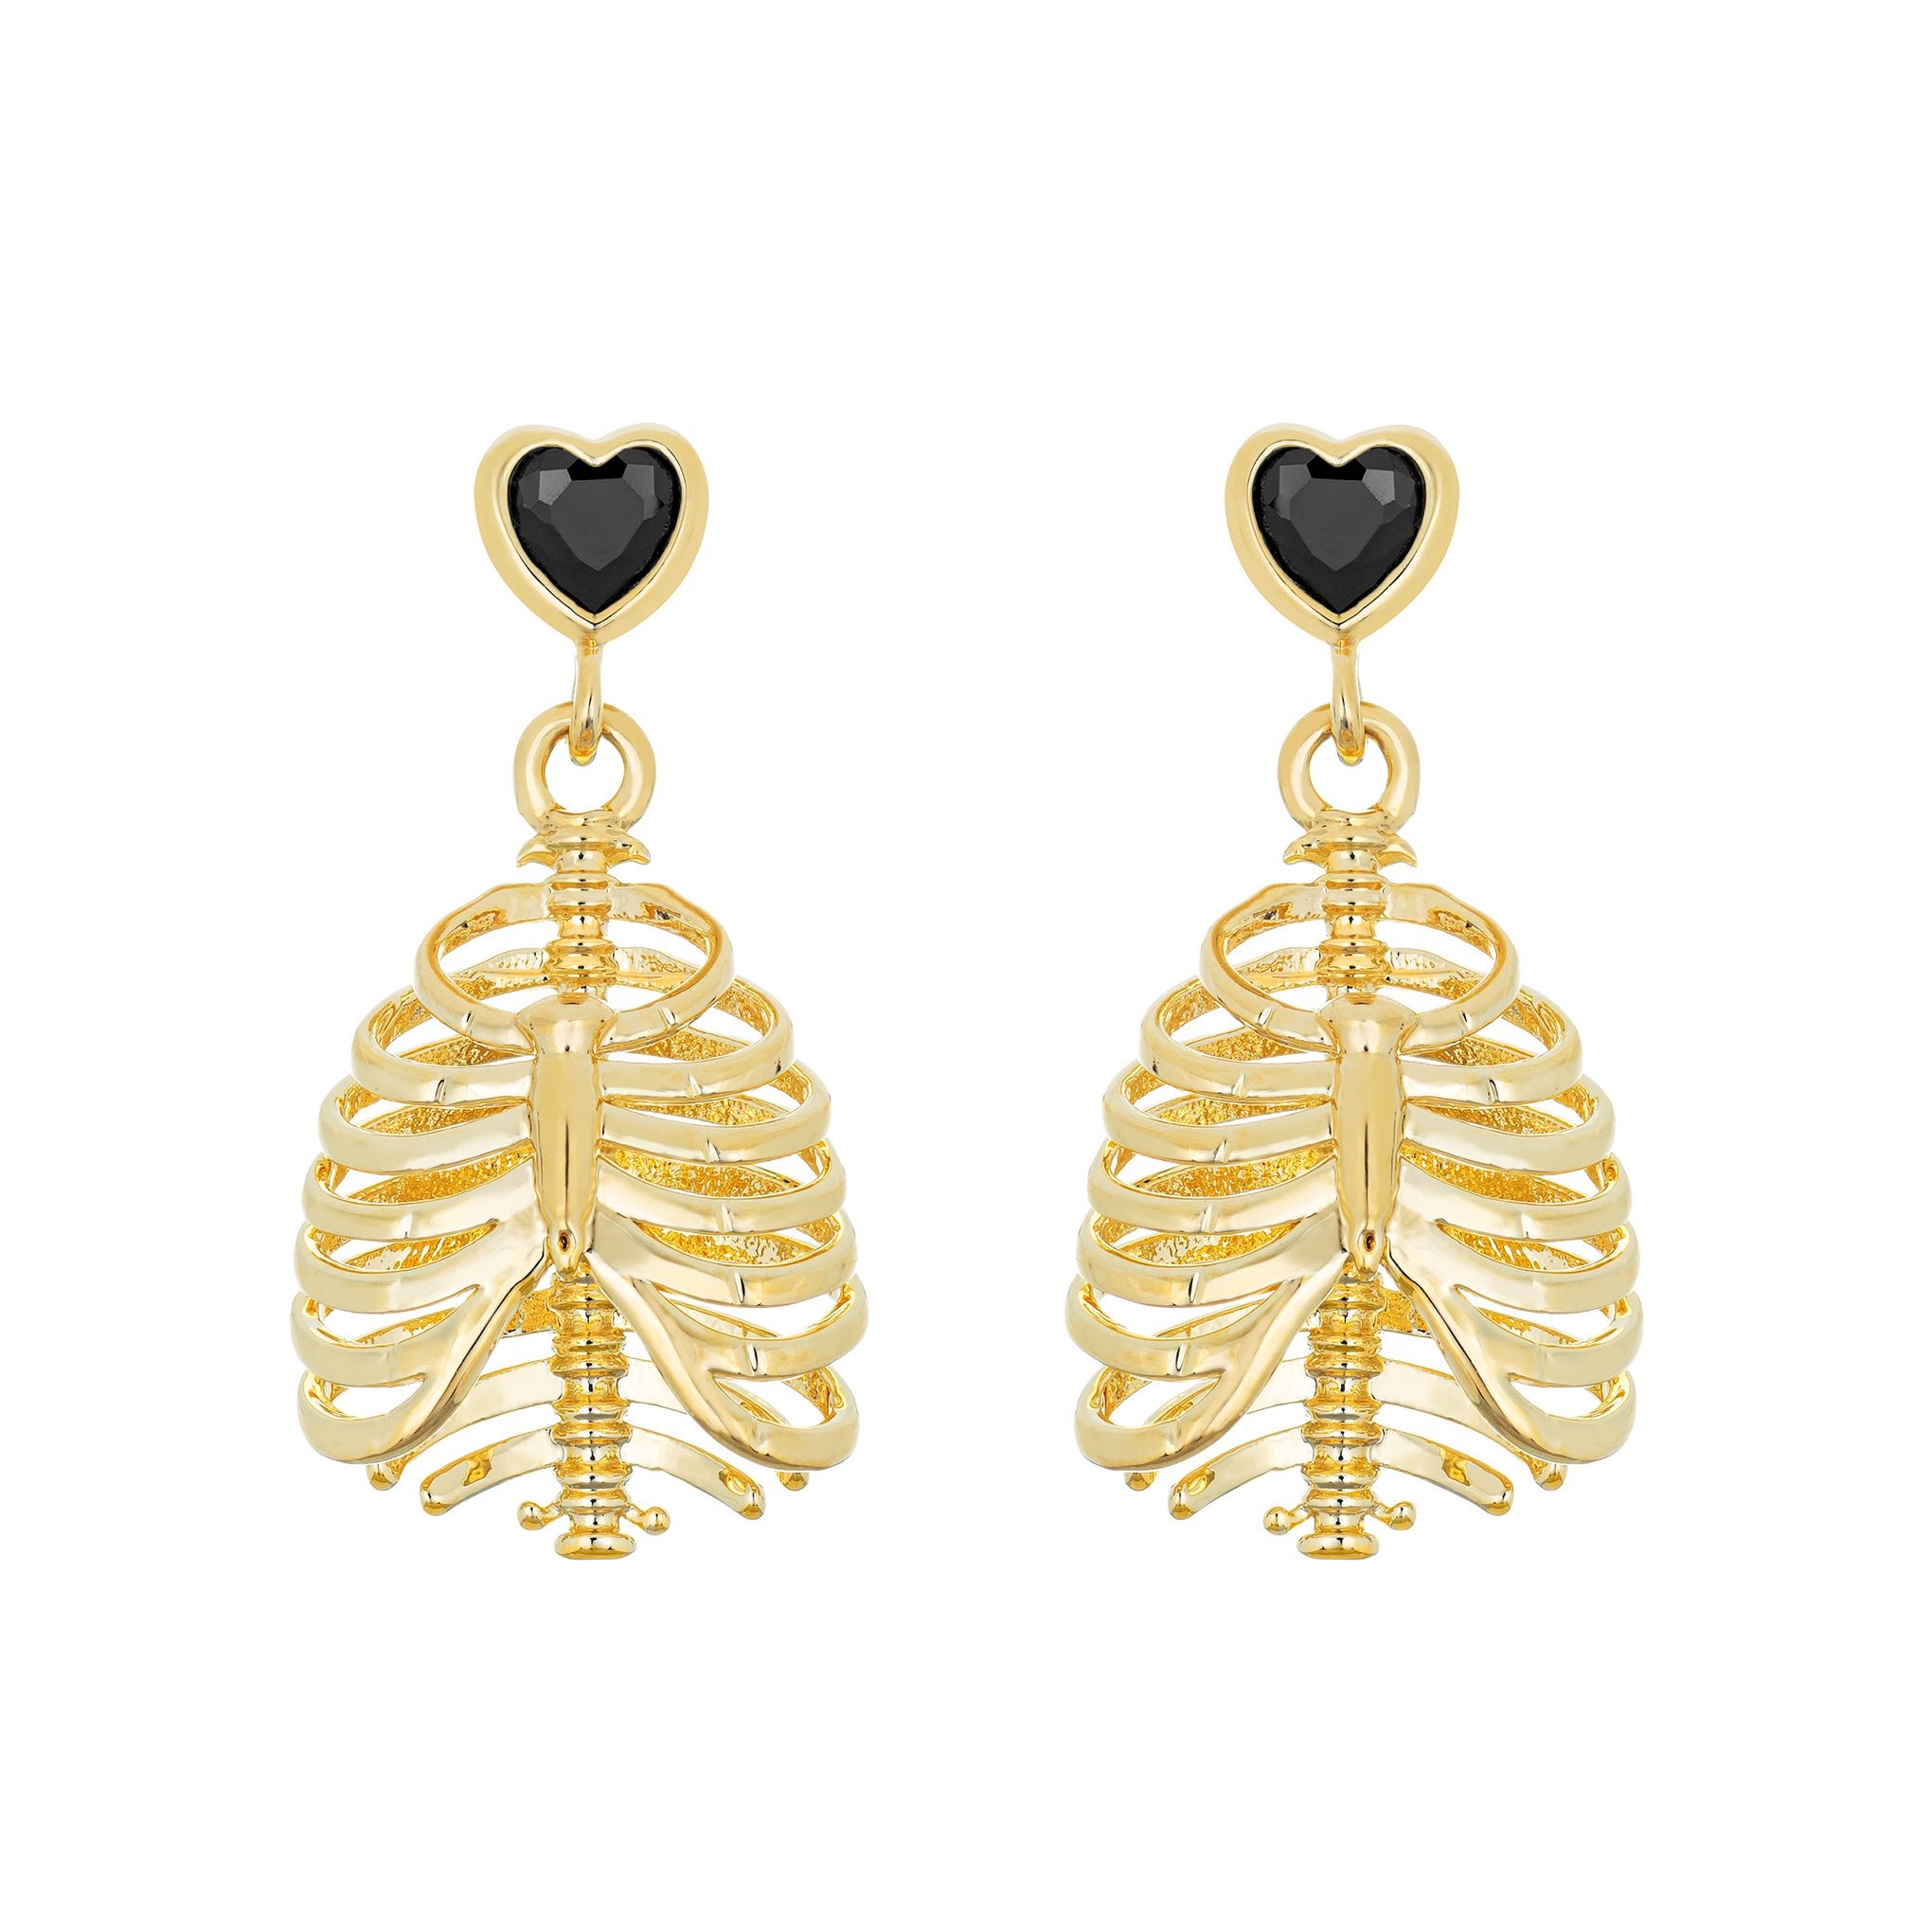 Heart in a Cage Earrings - 18K Gold Plated